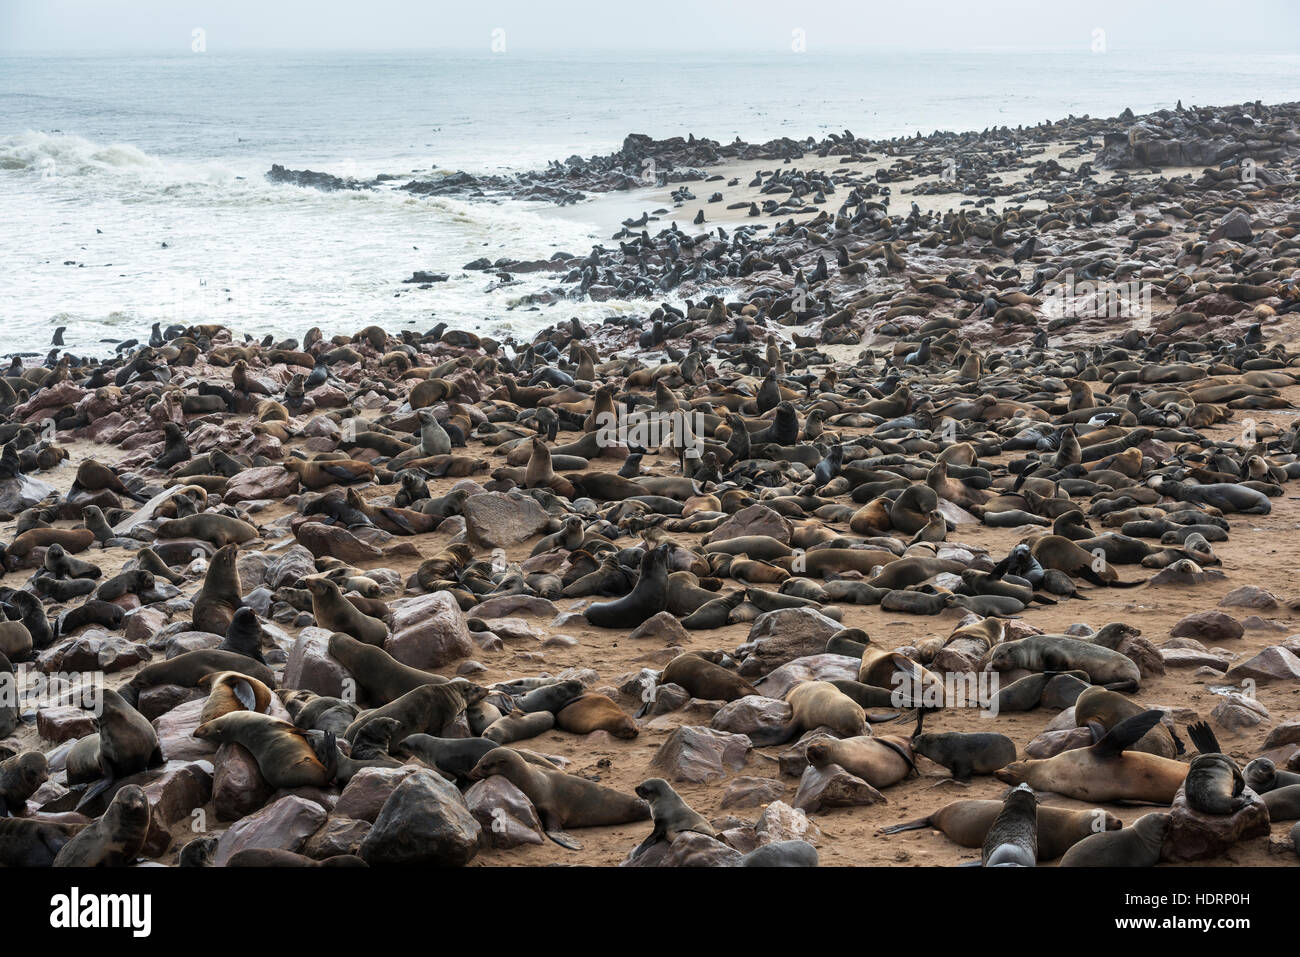 One of the largest colonies of cape fur seals (Arctocephalus pusillus) in the world at Cape Cross Seal Reserve, Skeleton Coast, western Namibia Stock Photo